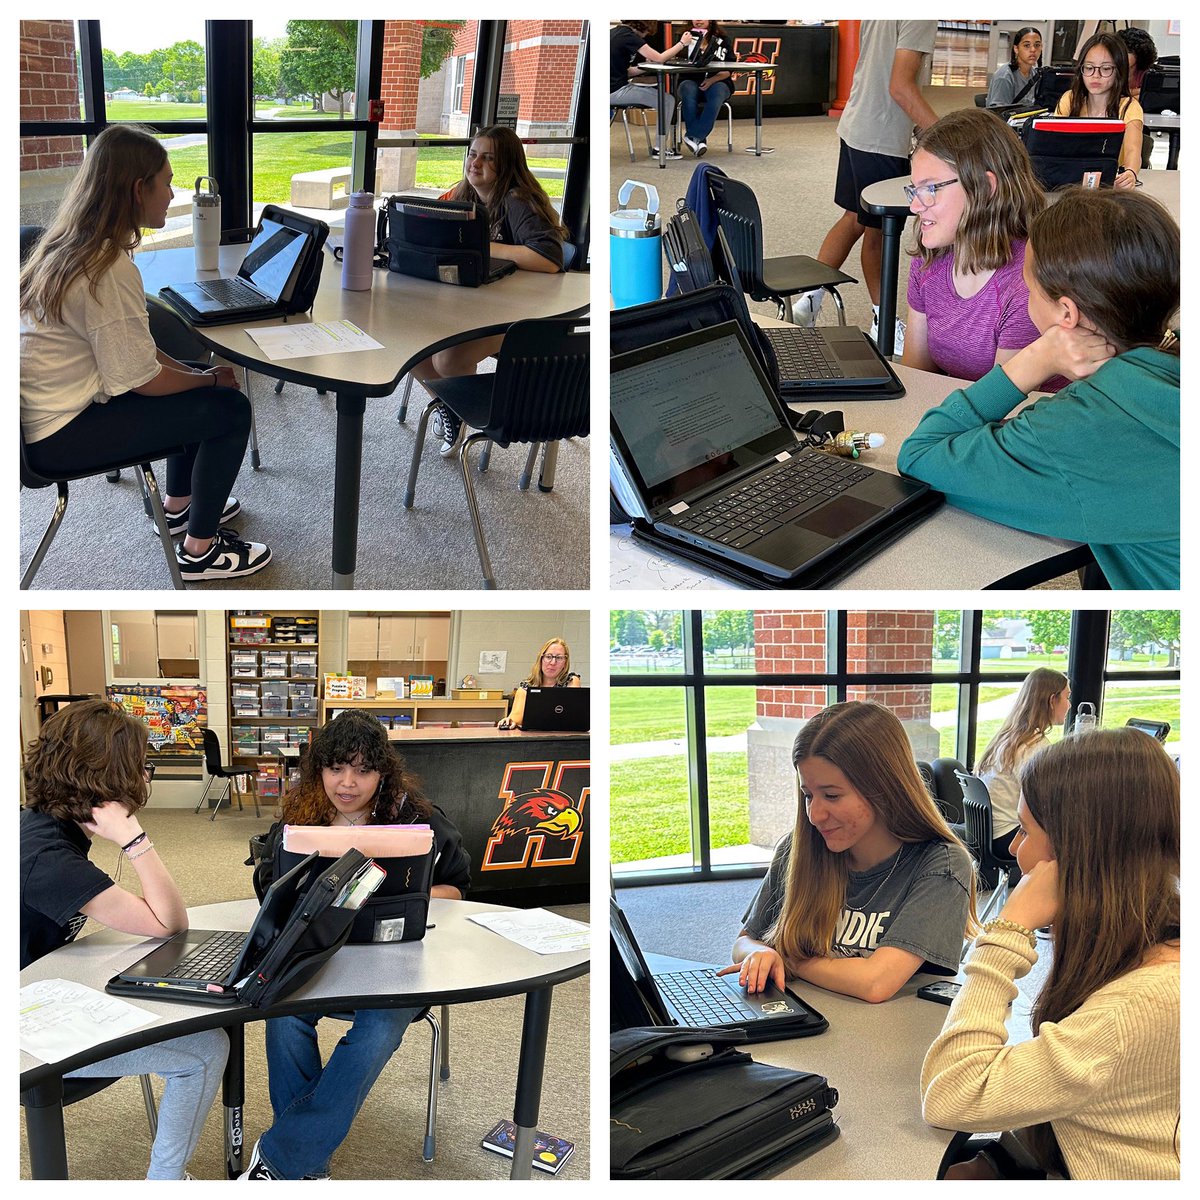 Time well spent peer reviewing each other’s stories. Students learned how to give positive feedback and constructive criticism. #thewritinglife #peerreview